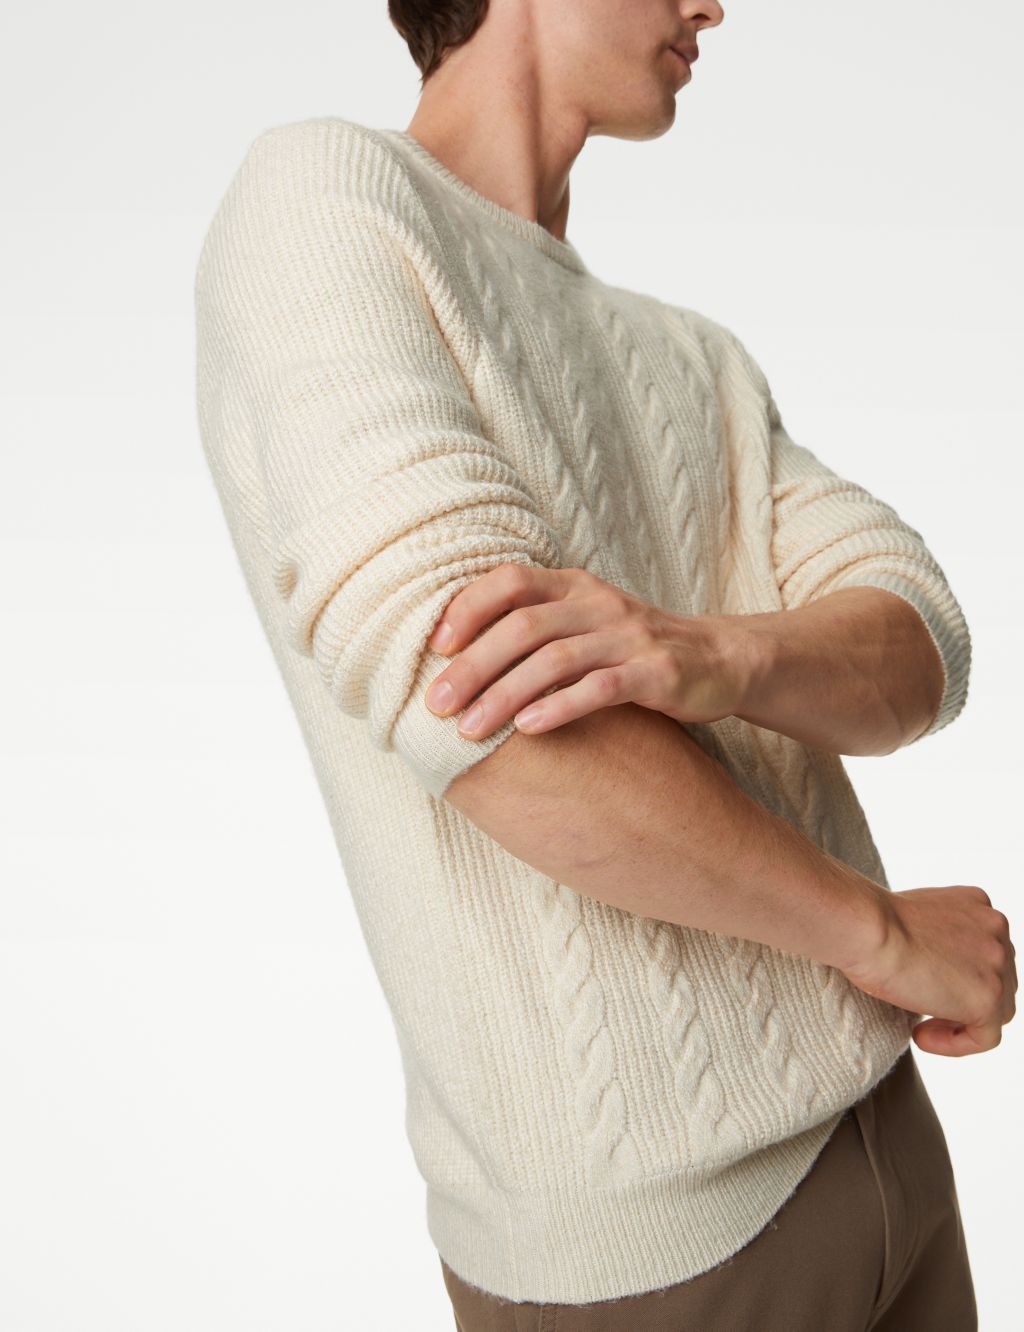 Supersoft Chunky Cable Crew Neck Jumper image 6